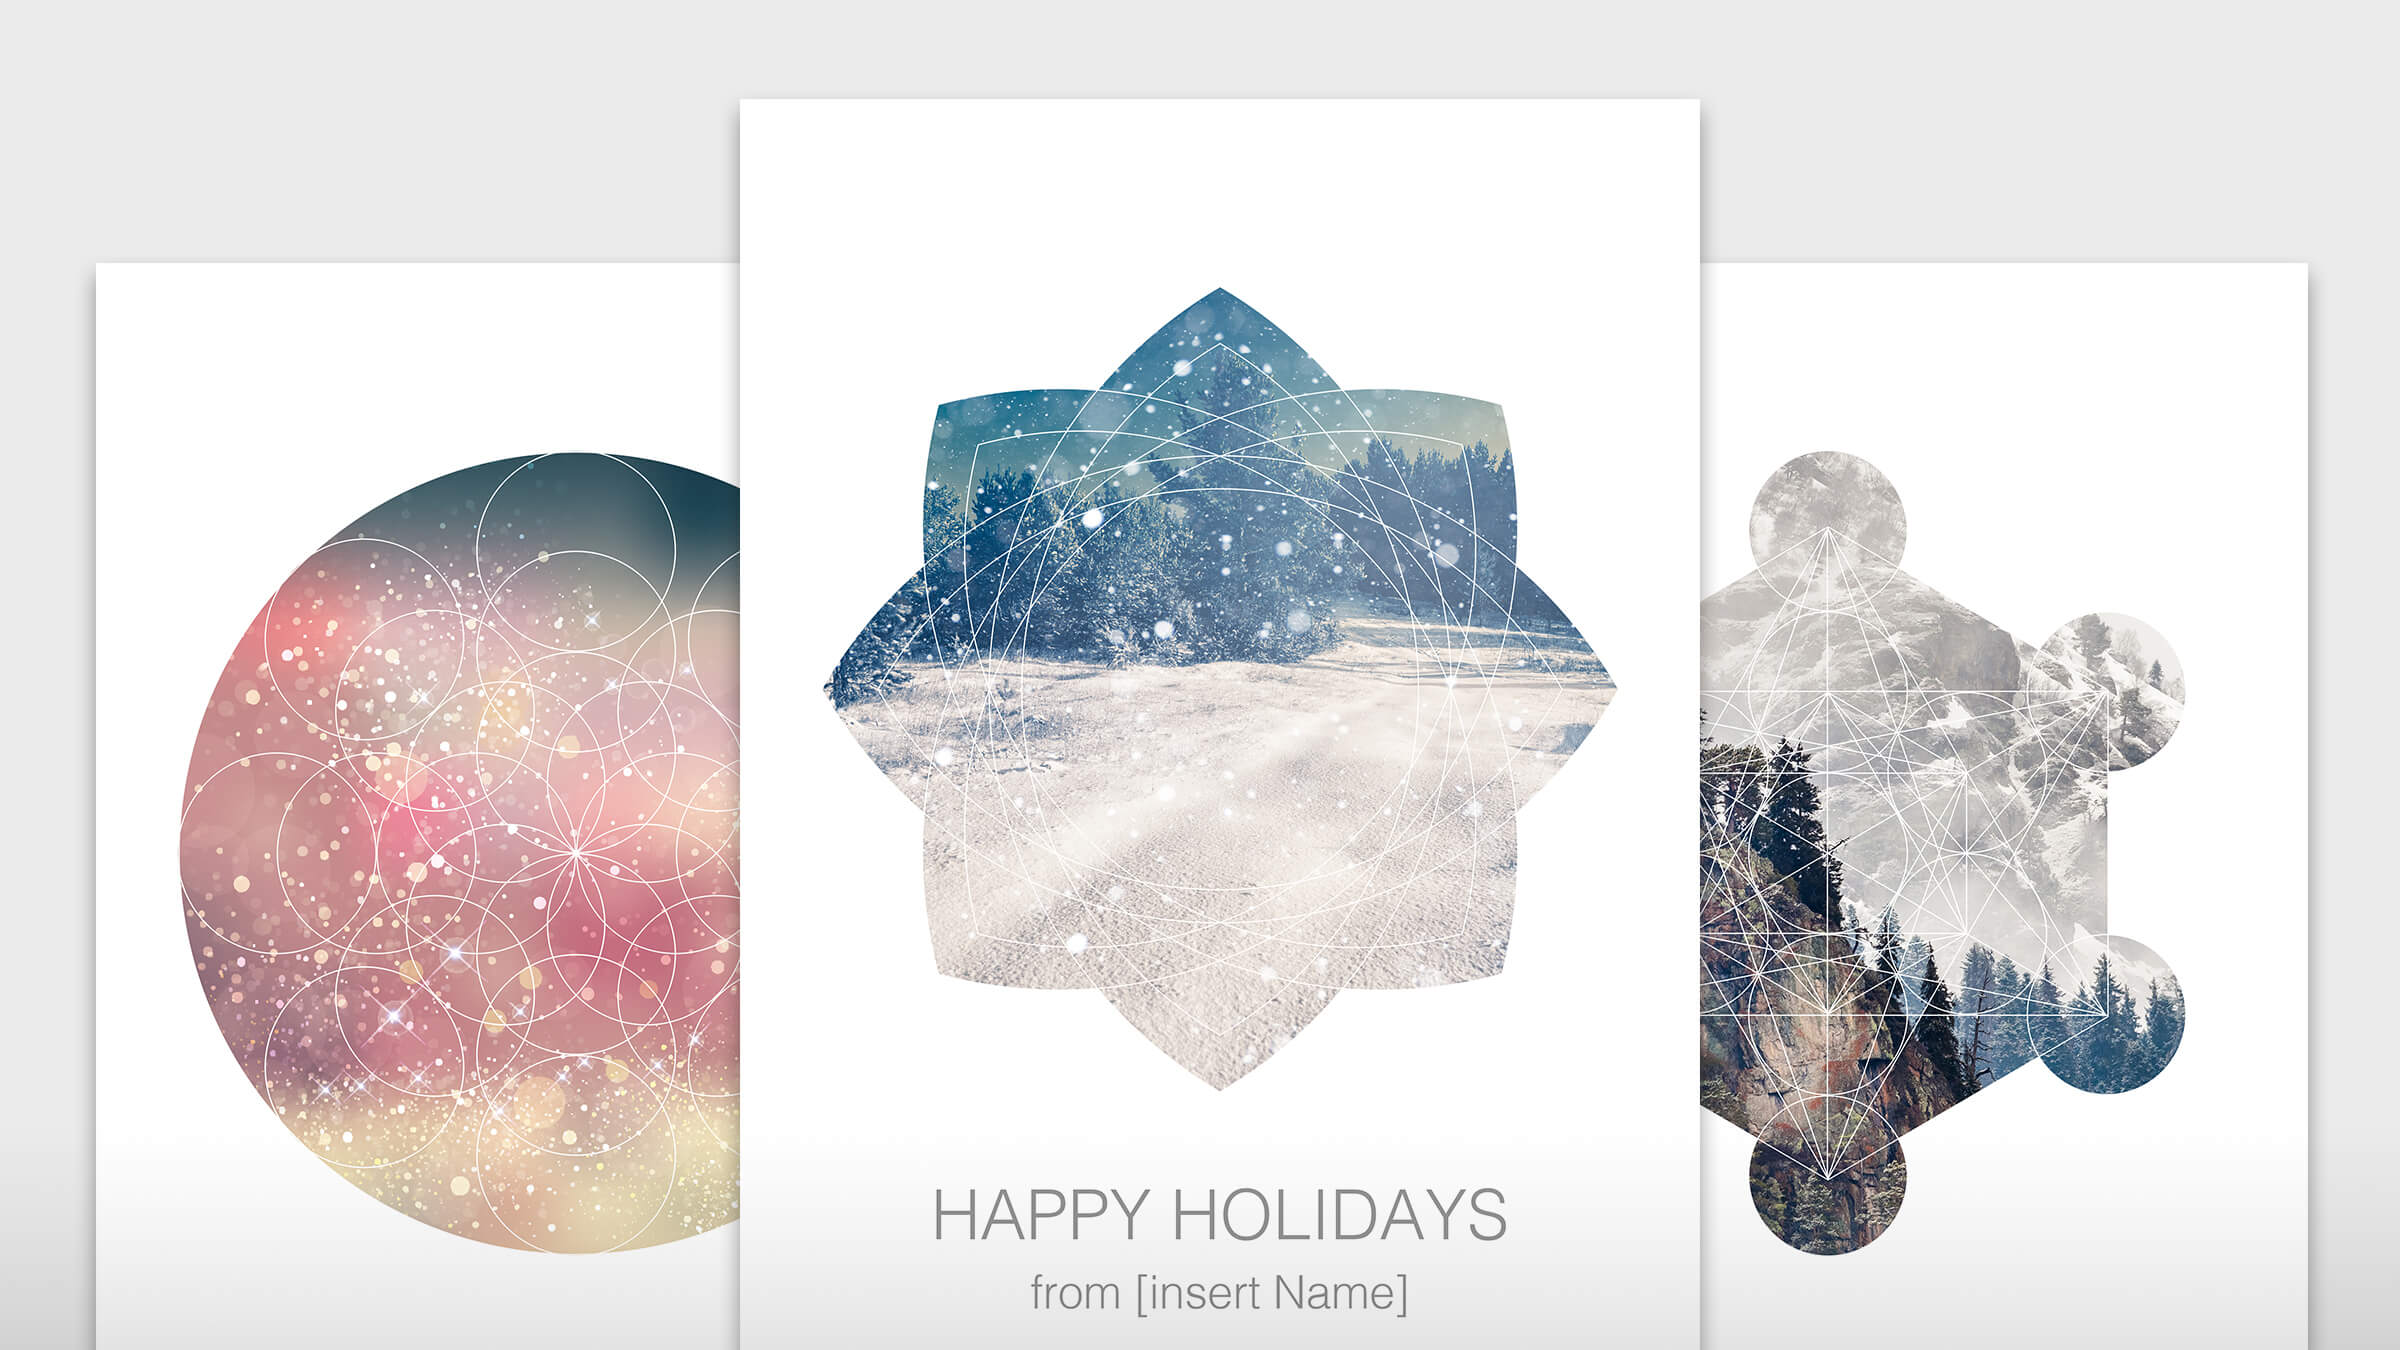 Create A Unique Holiday Card With An Adobe Stock Template For Adobe Illustrator Christmas Card Template